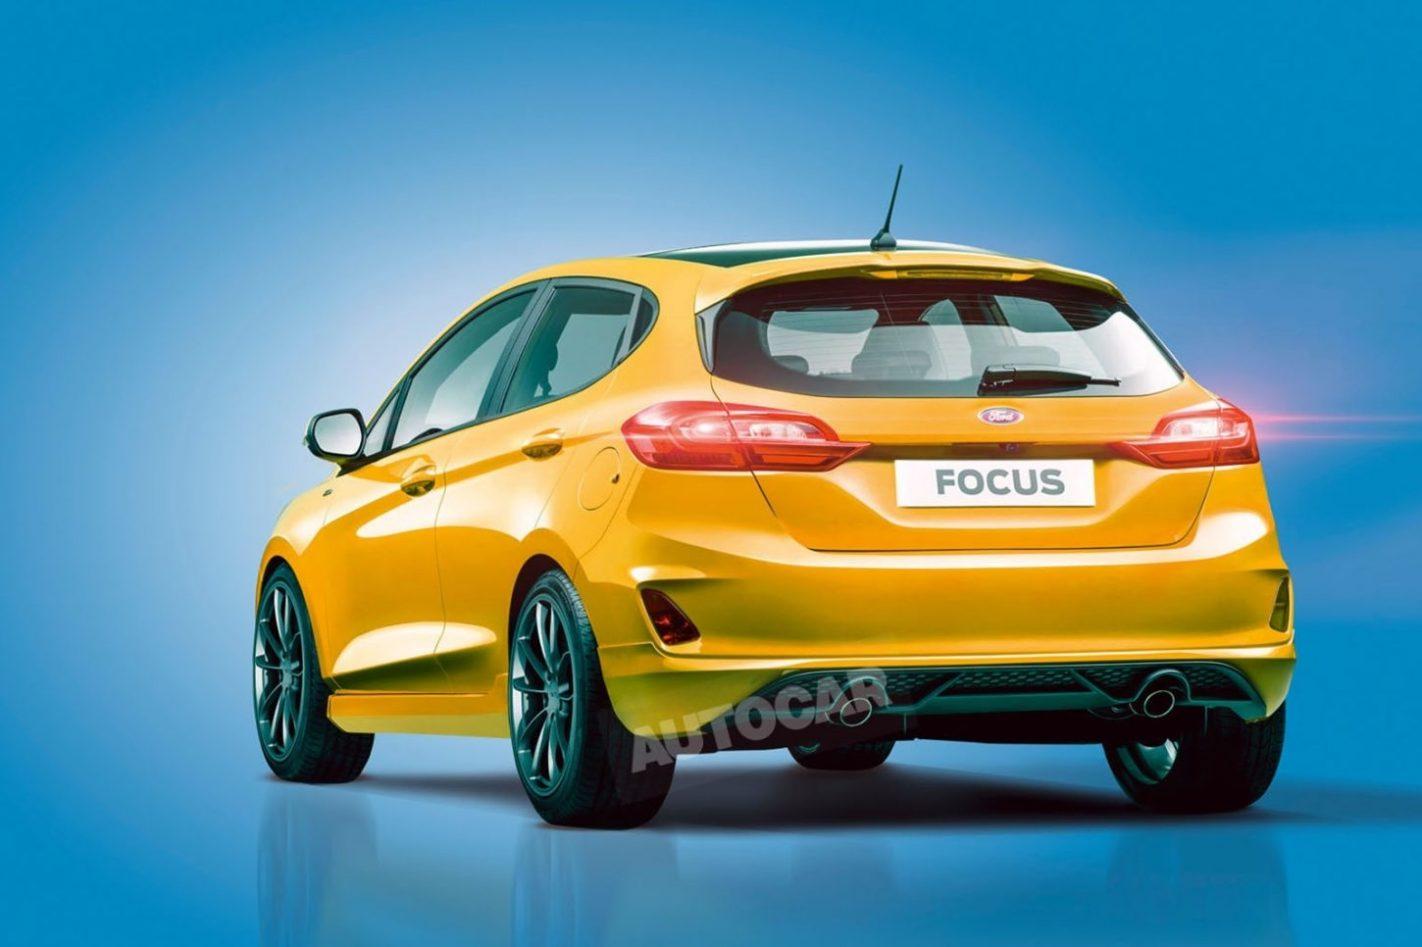 Ford Focus ST Tail Light High Resolution Wallpaper. Auto Car